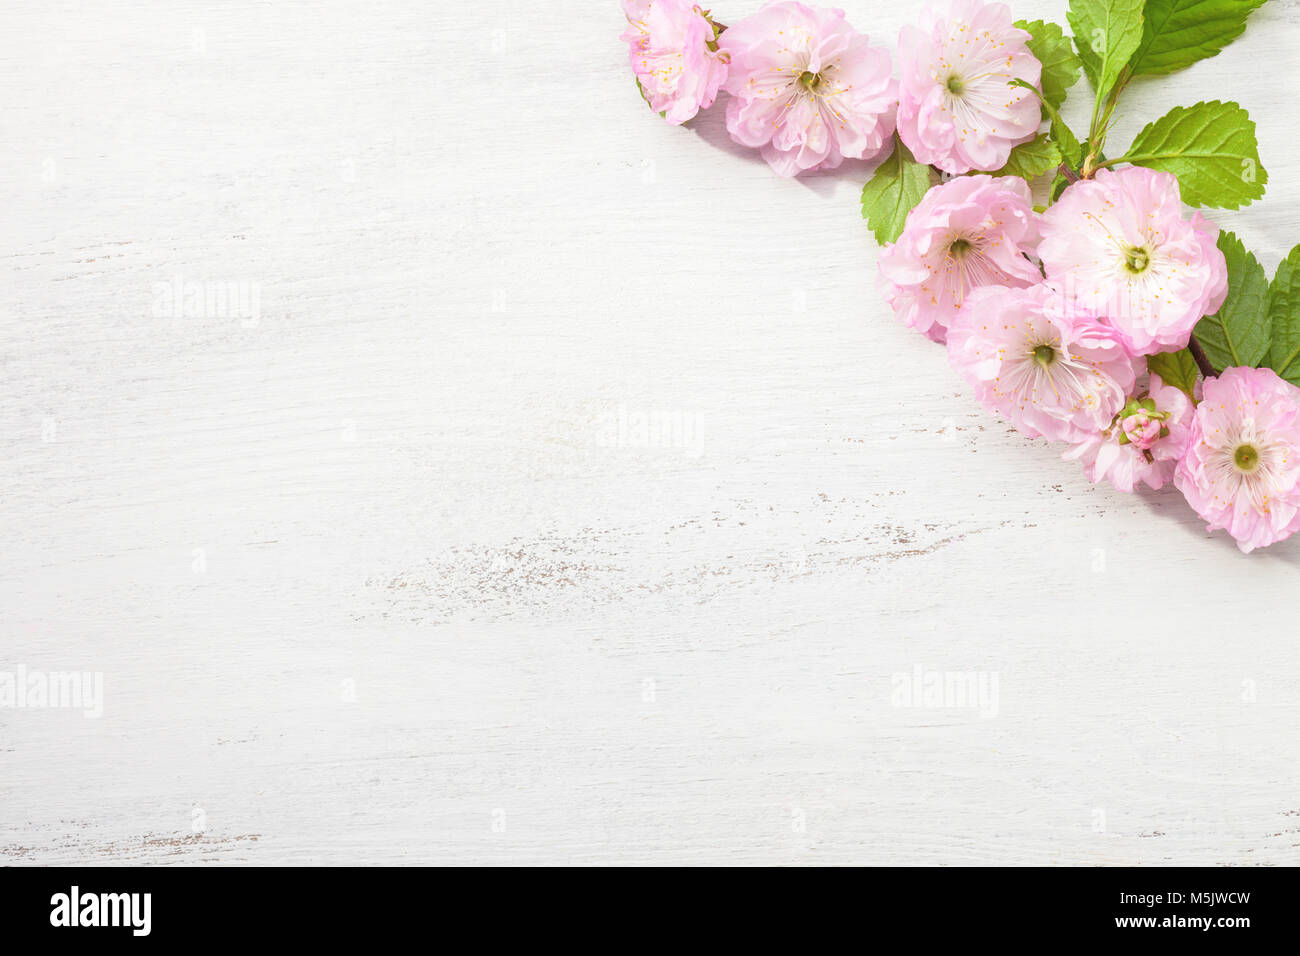 Branch of blossom Almond (Prunus triloba) on white wooden table. Stock Photo